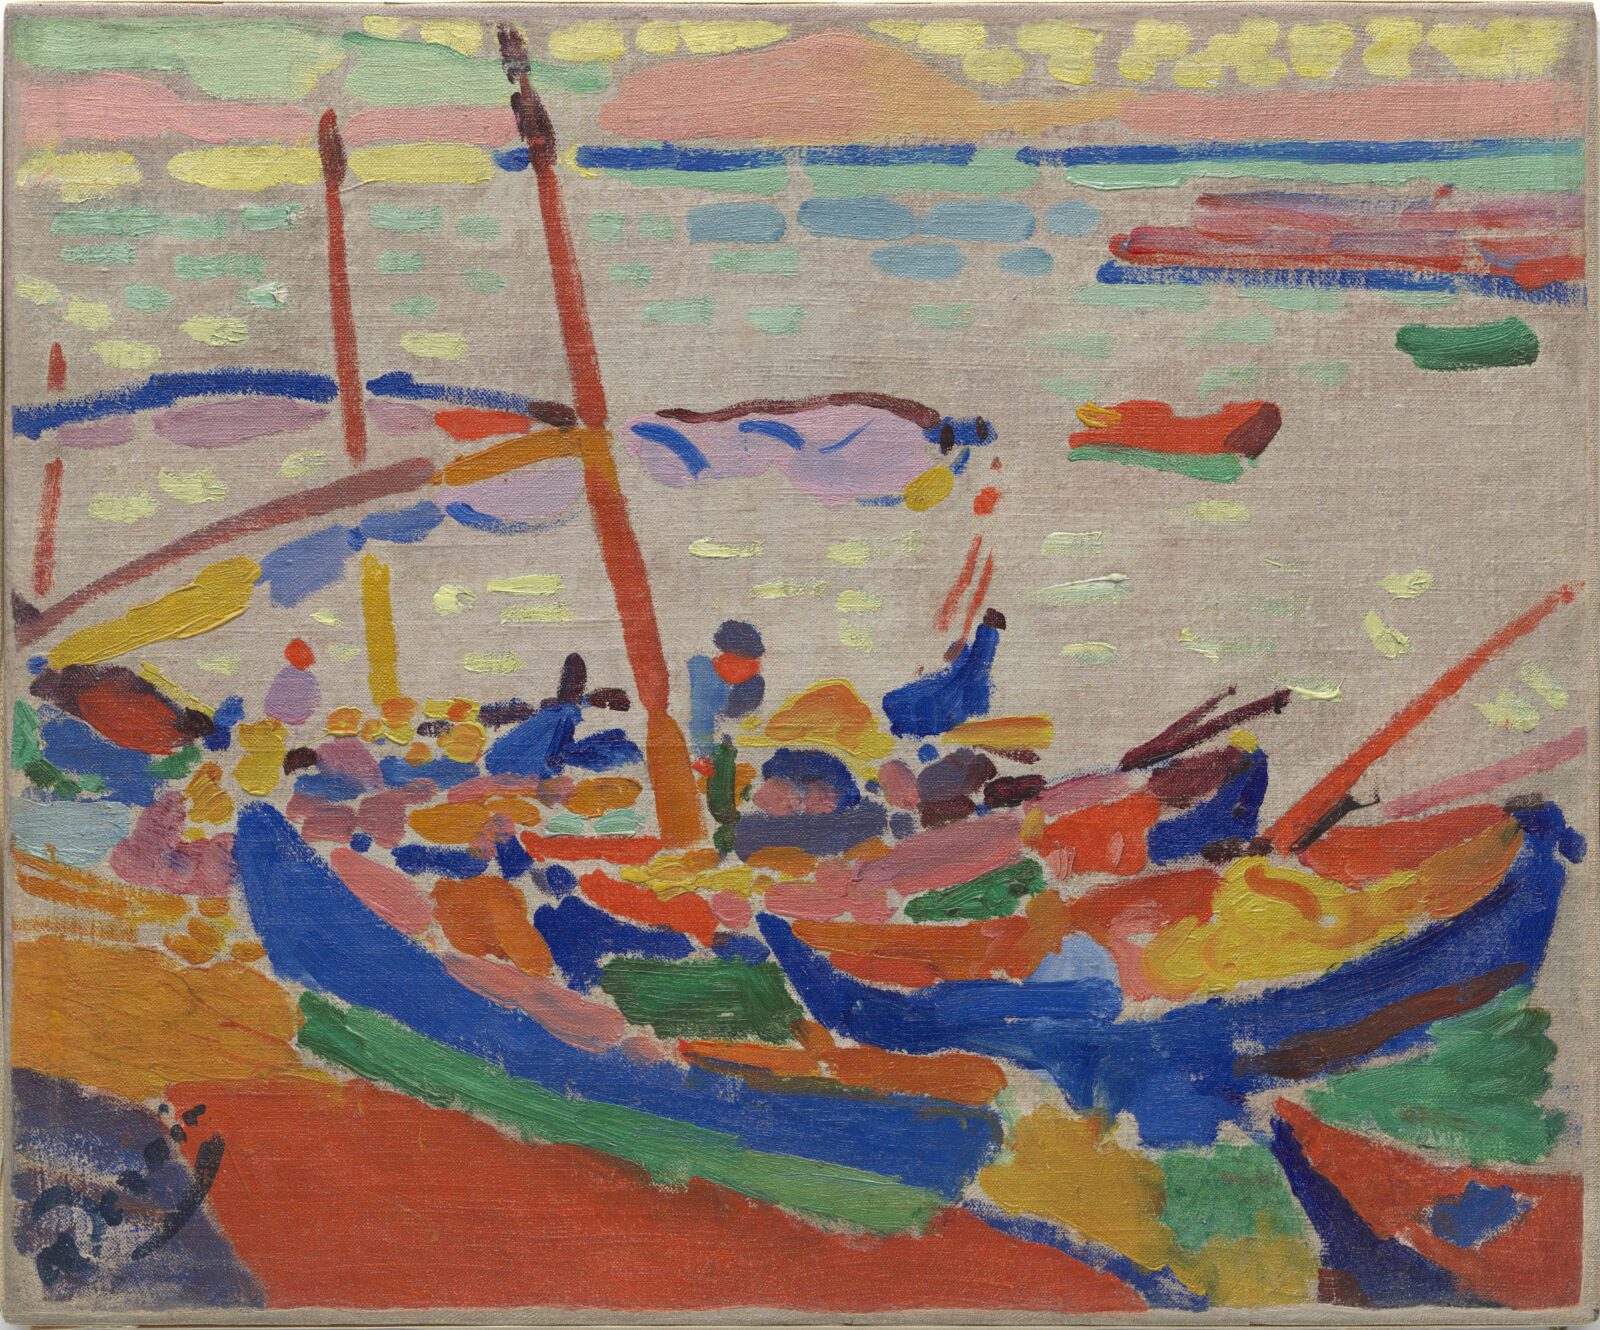 André Derain, Fishing Boats, Collioure, 1905, oil on canvas, Museum of Modern Art, New York, the Philip L. Goodwin Collection. © 2023 Artists Rights Society (ARS), New York / ADAGP, Paris